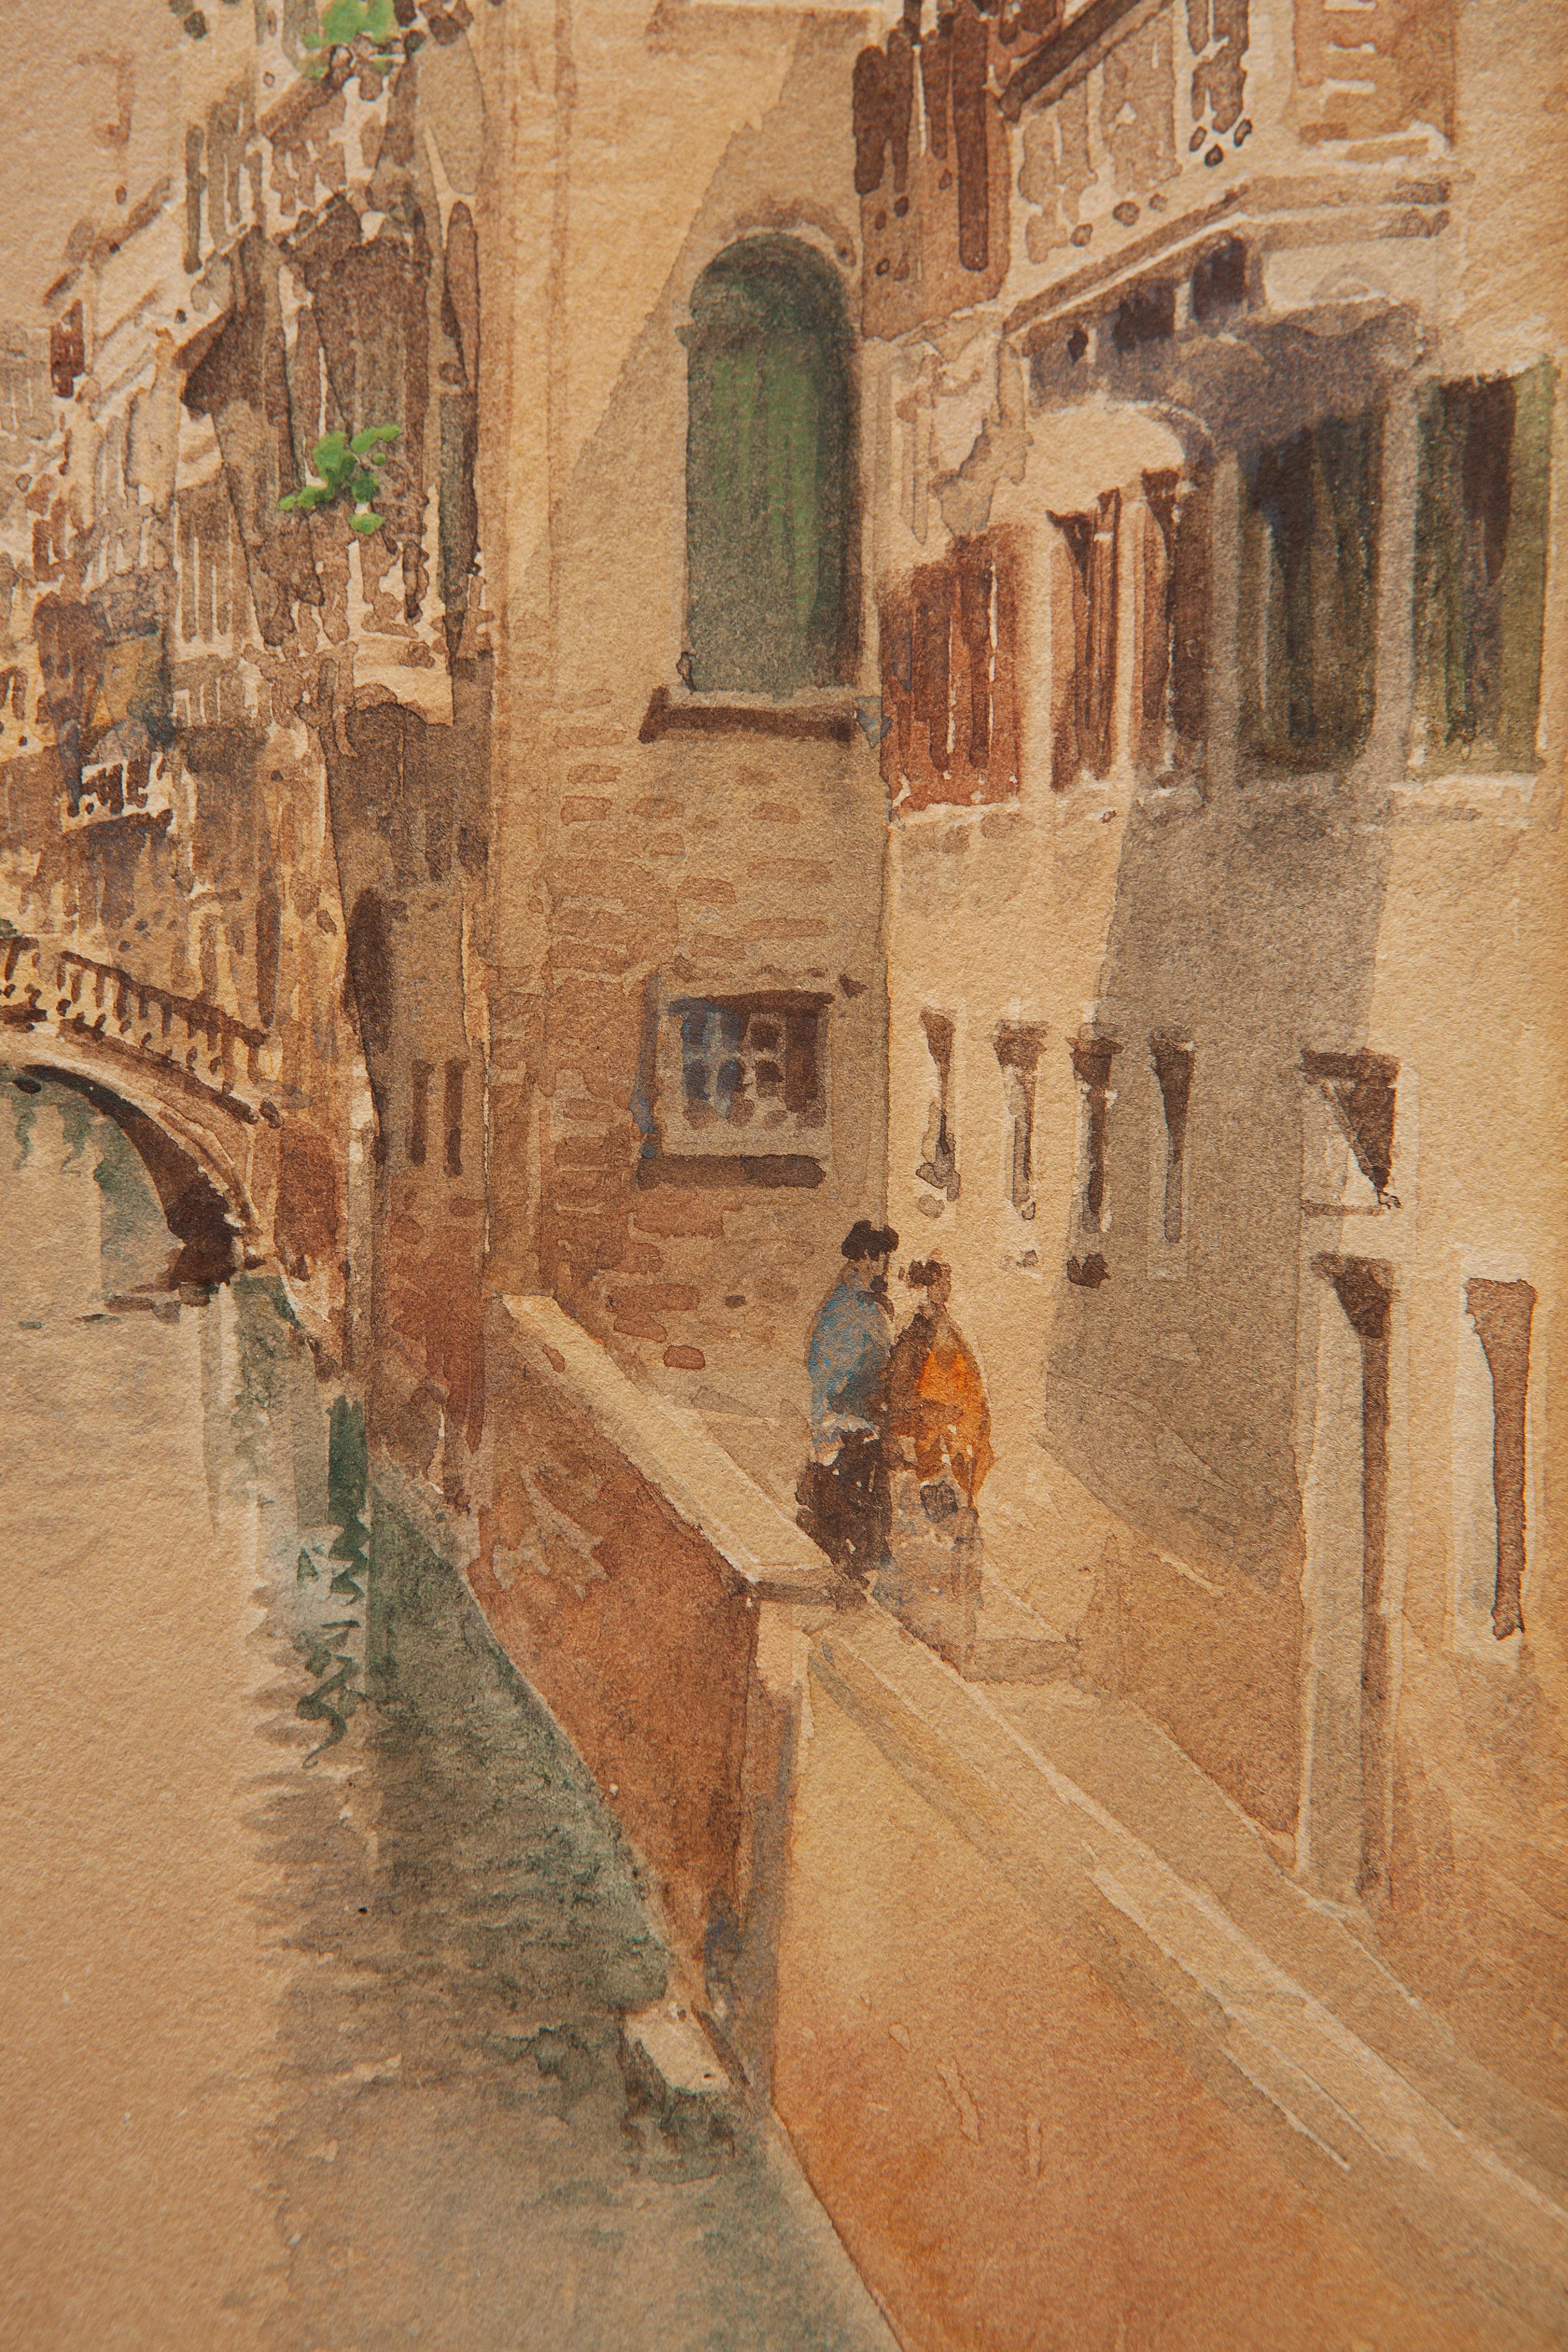 Andrea Biondetti (1851-1946)

Canal in Venice
Watercolor painting on paper
Size: 24x15 cm  (48x39 cm including the frame)
Last Quarter 19th Century
Signed lower right
The painting was framed with invisible glass